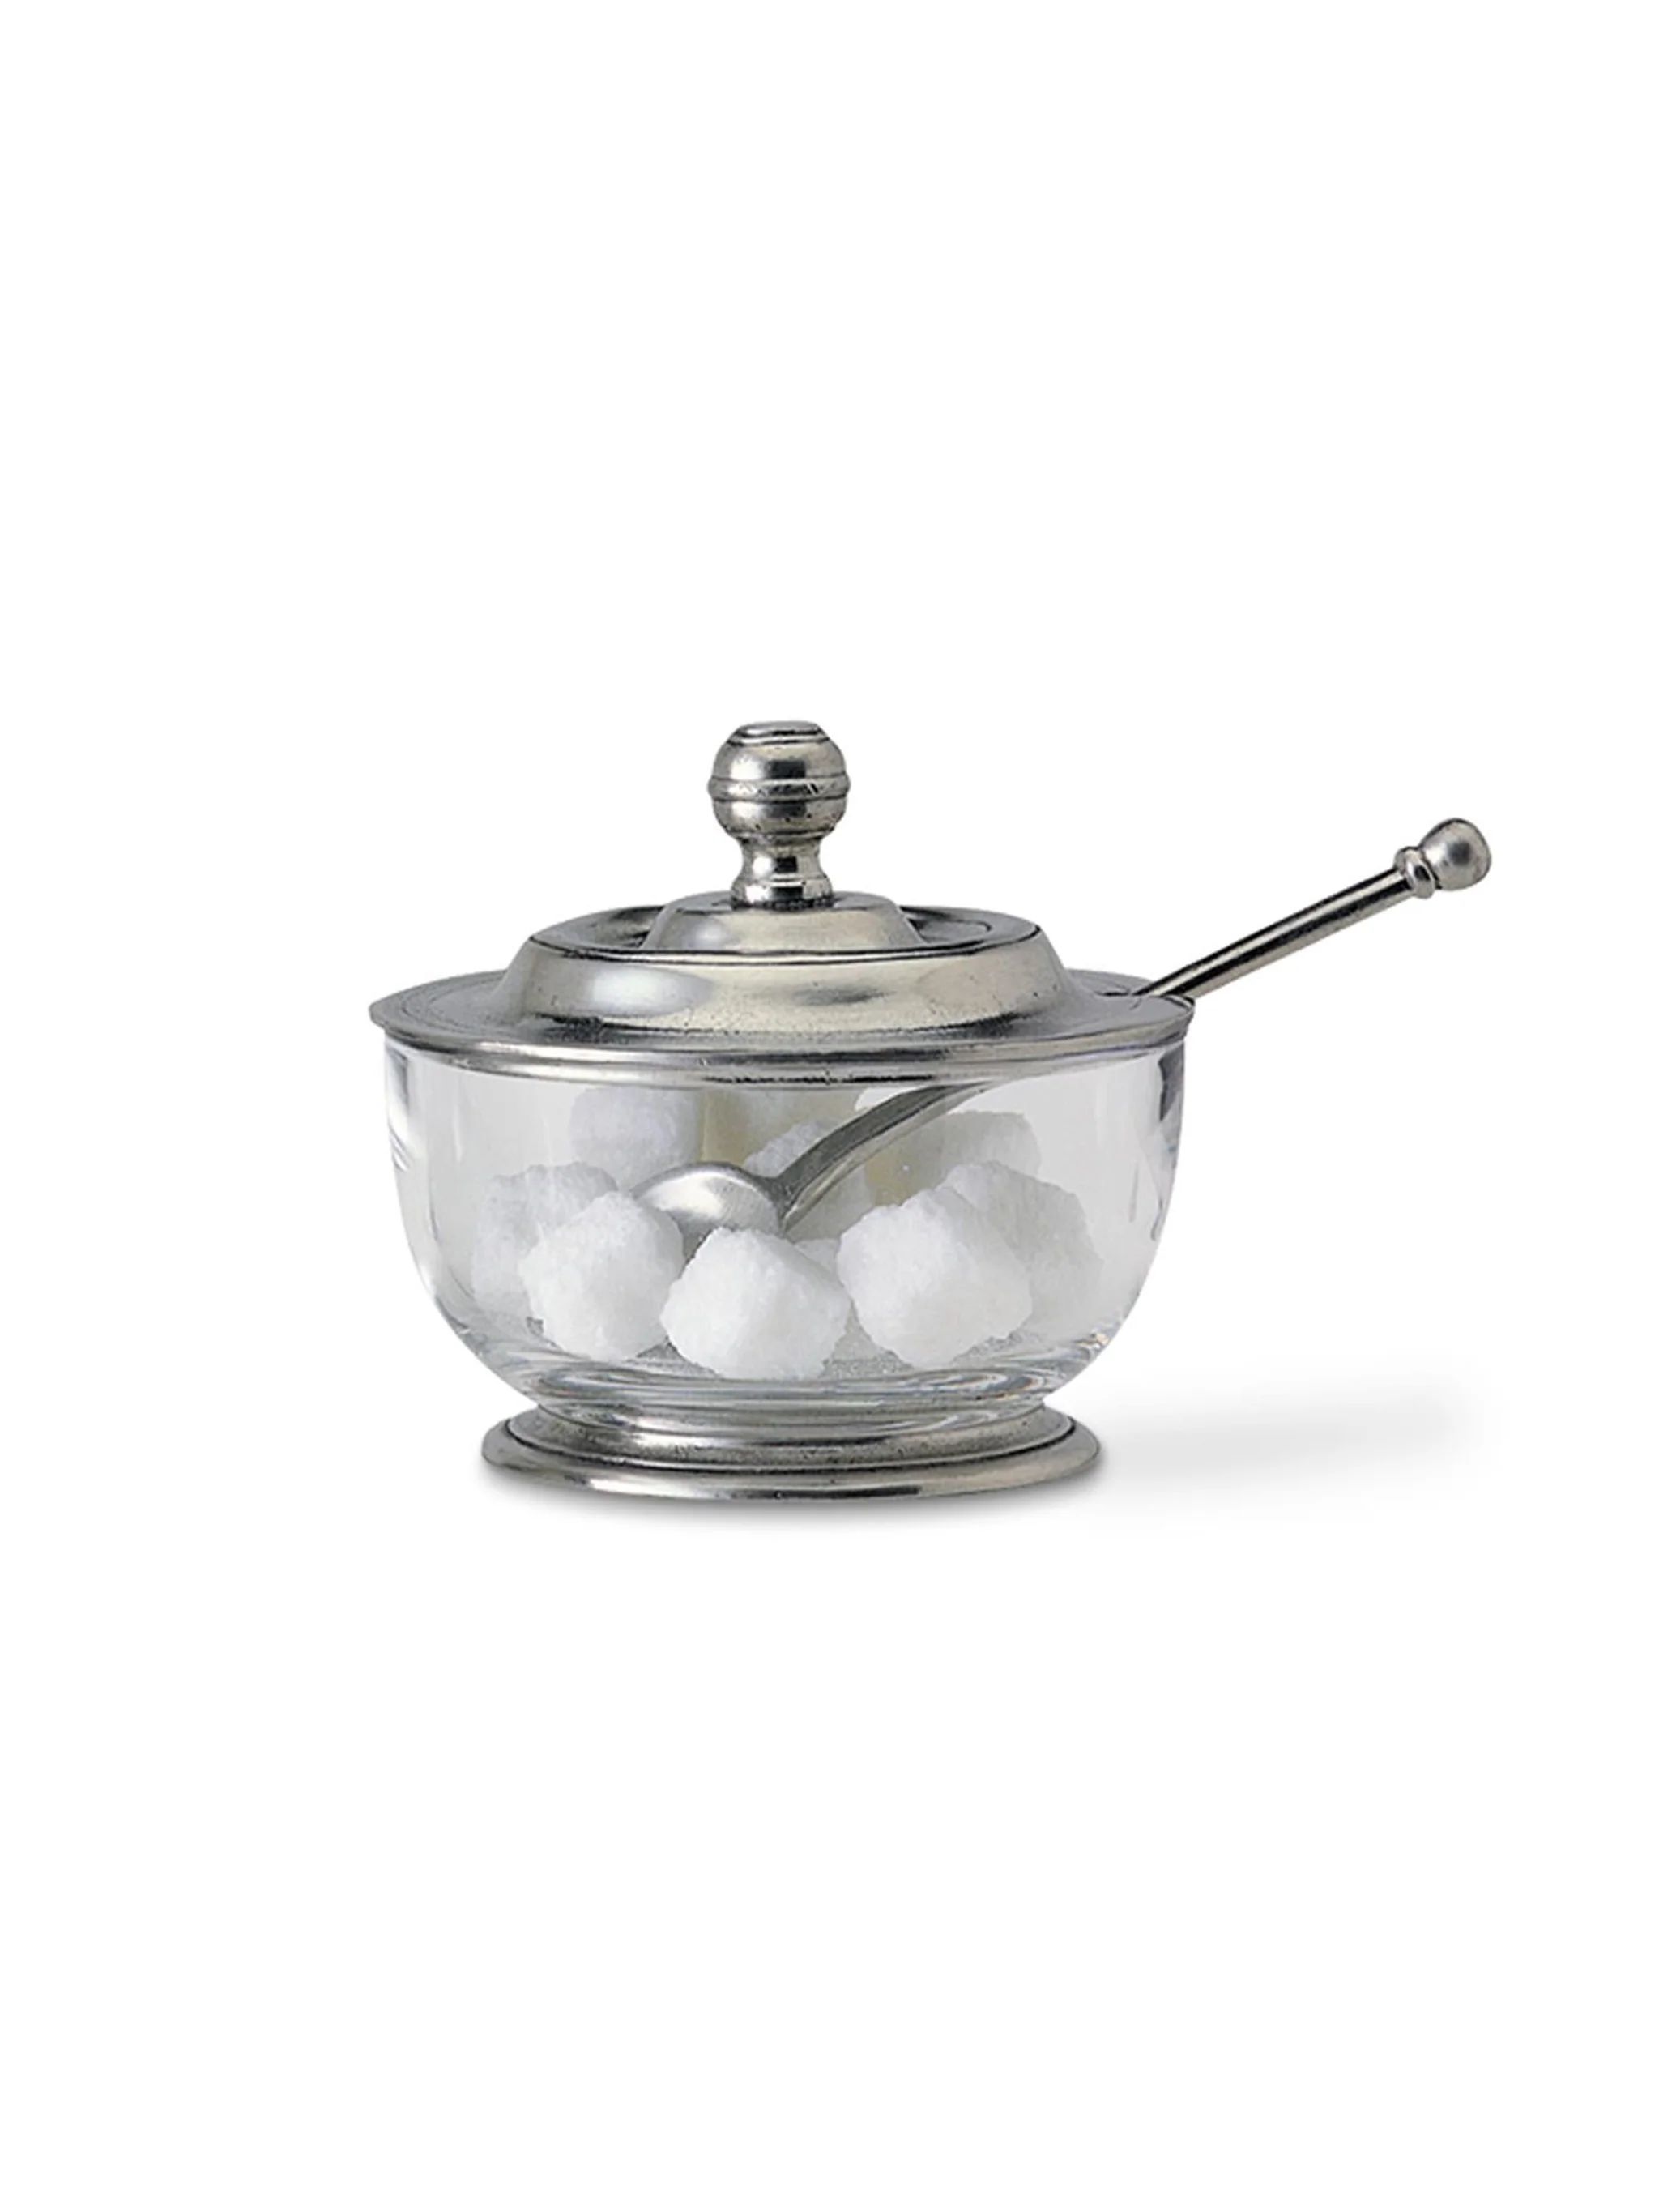 MATCH Pewter Sugar Bowl with Spoon | Weston Table